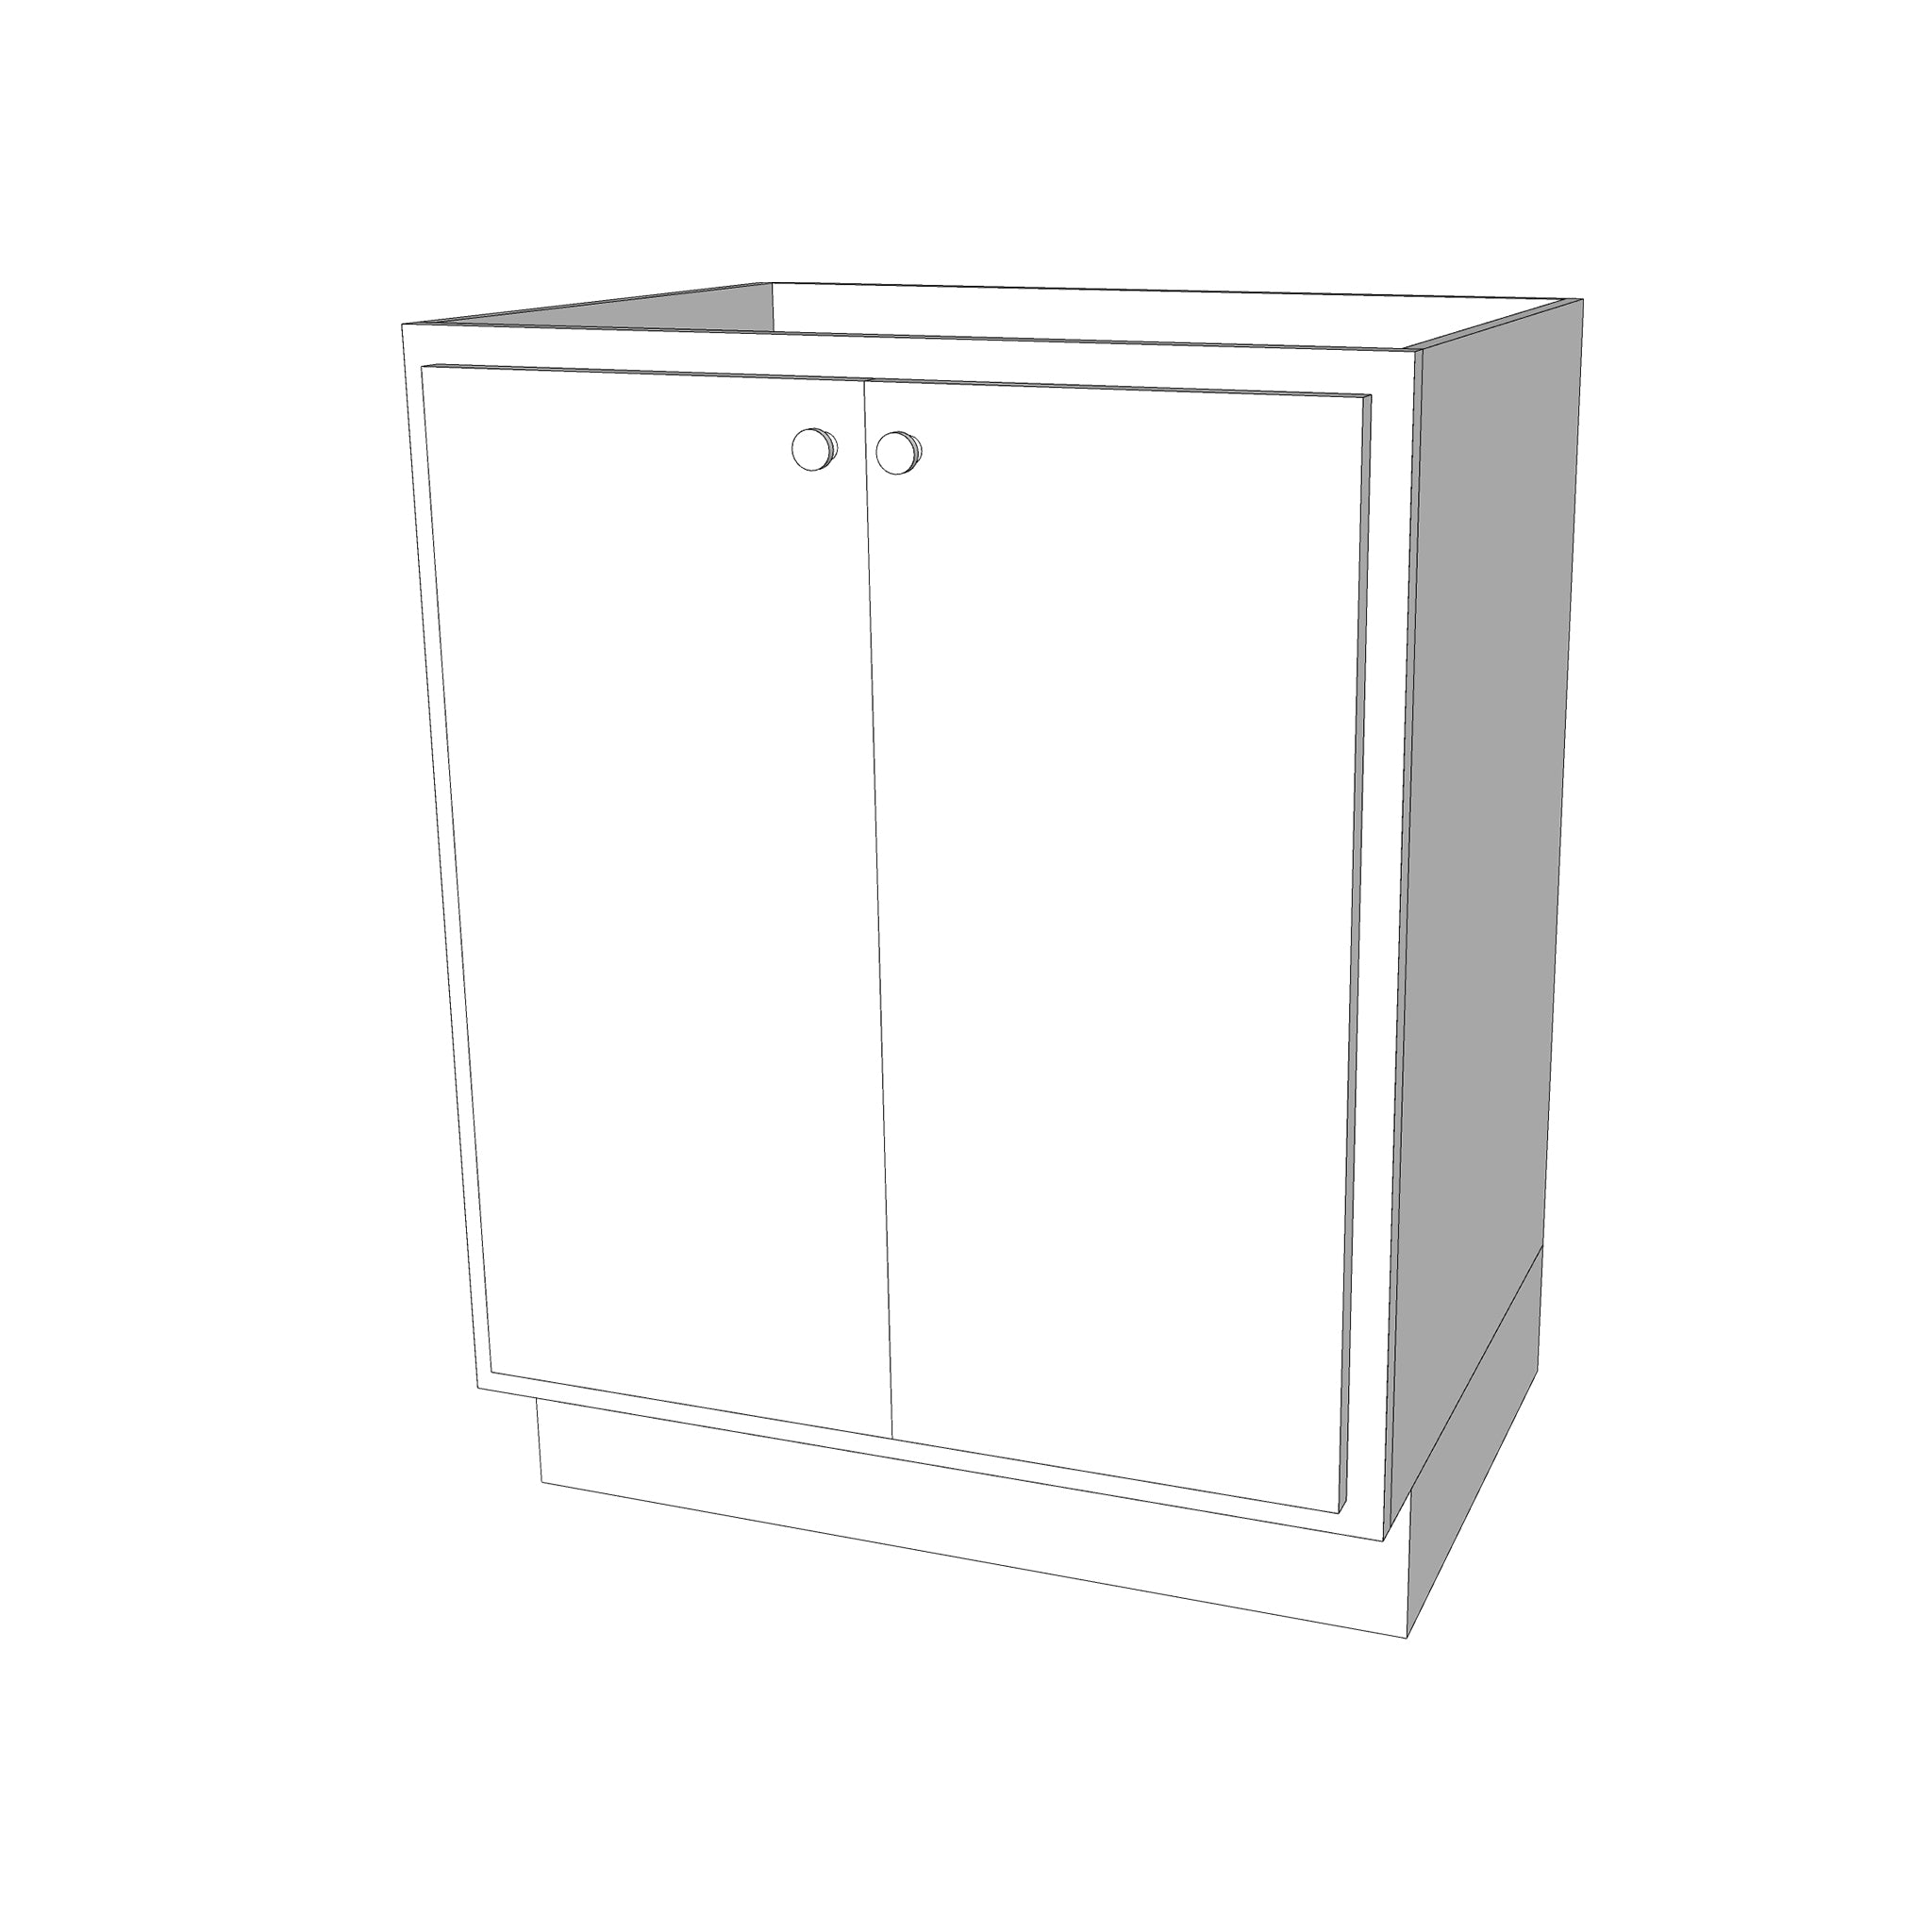 36x34 Full Height Vanity Base Cabinet - Assembled